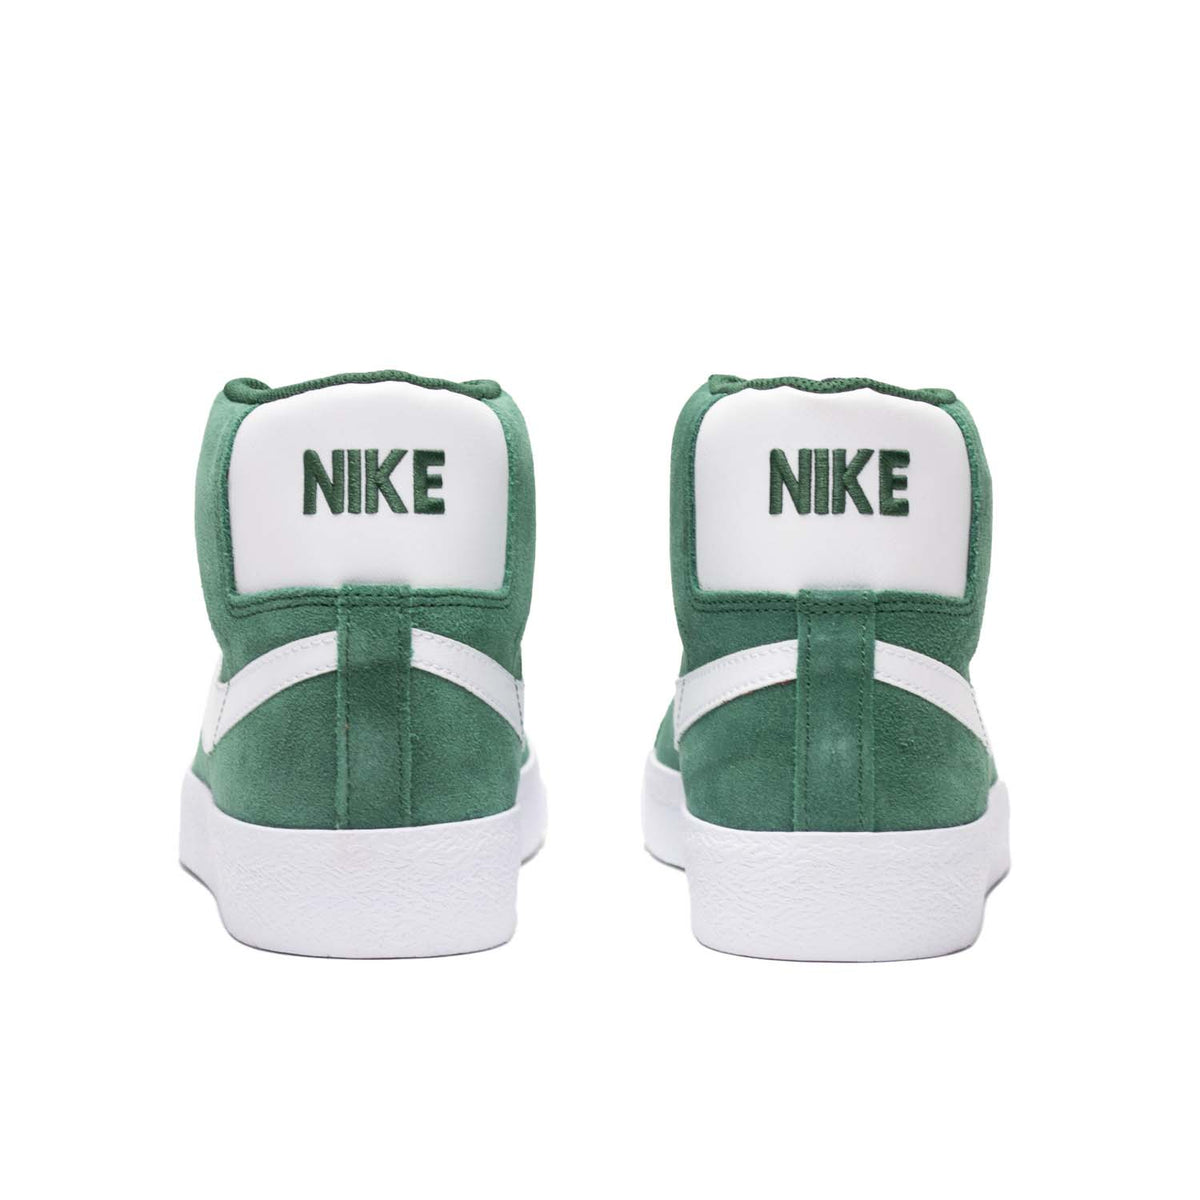 Nike Green suede high top skateboarding shoe with white Nike swoosh, white laces, and white sole.